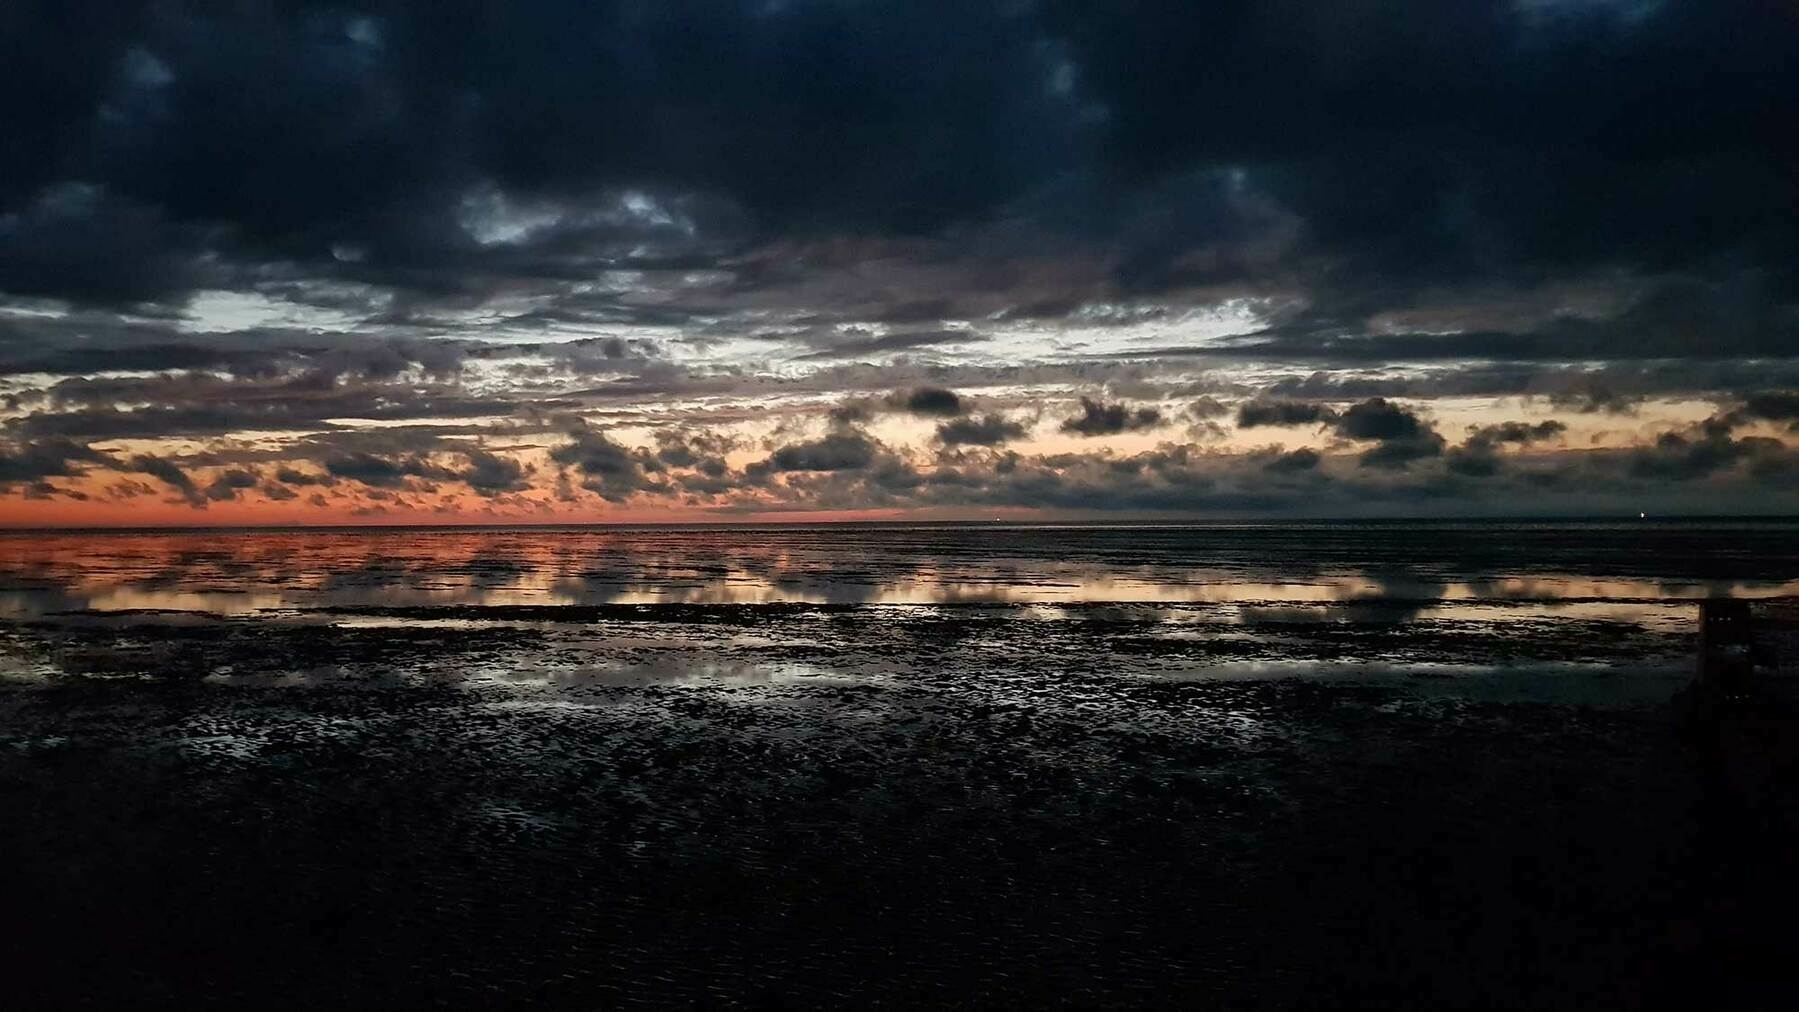 A very moody sunset over the sea